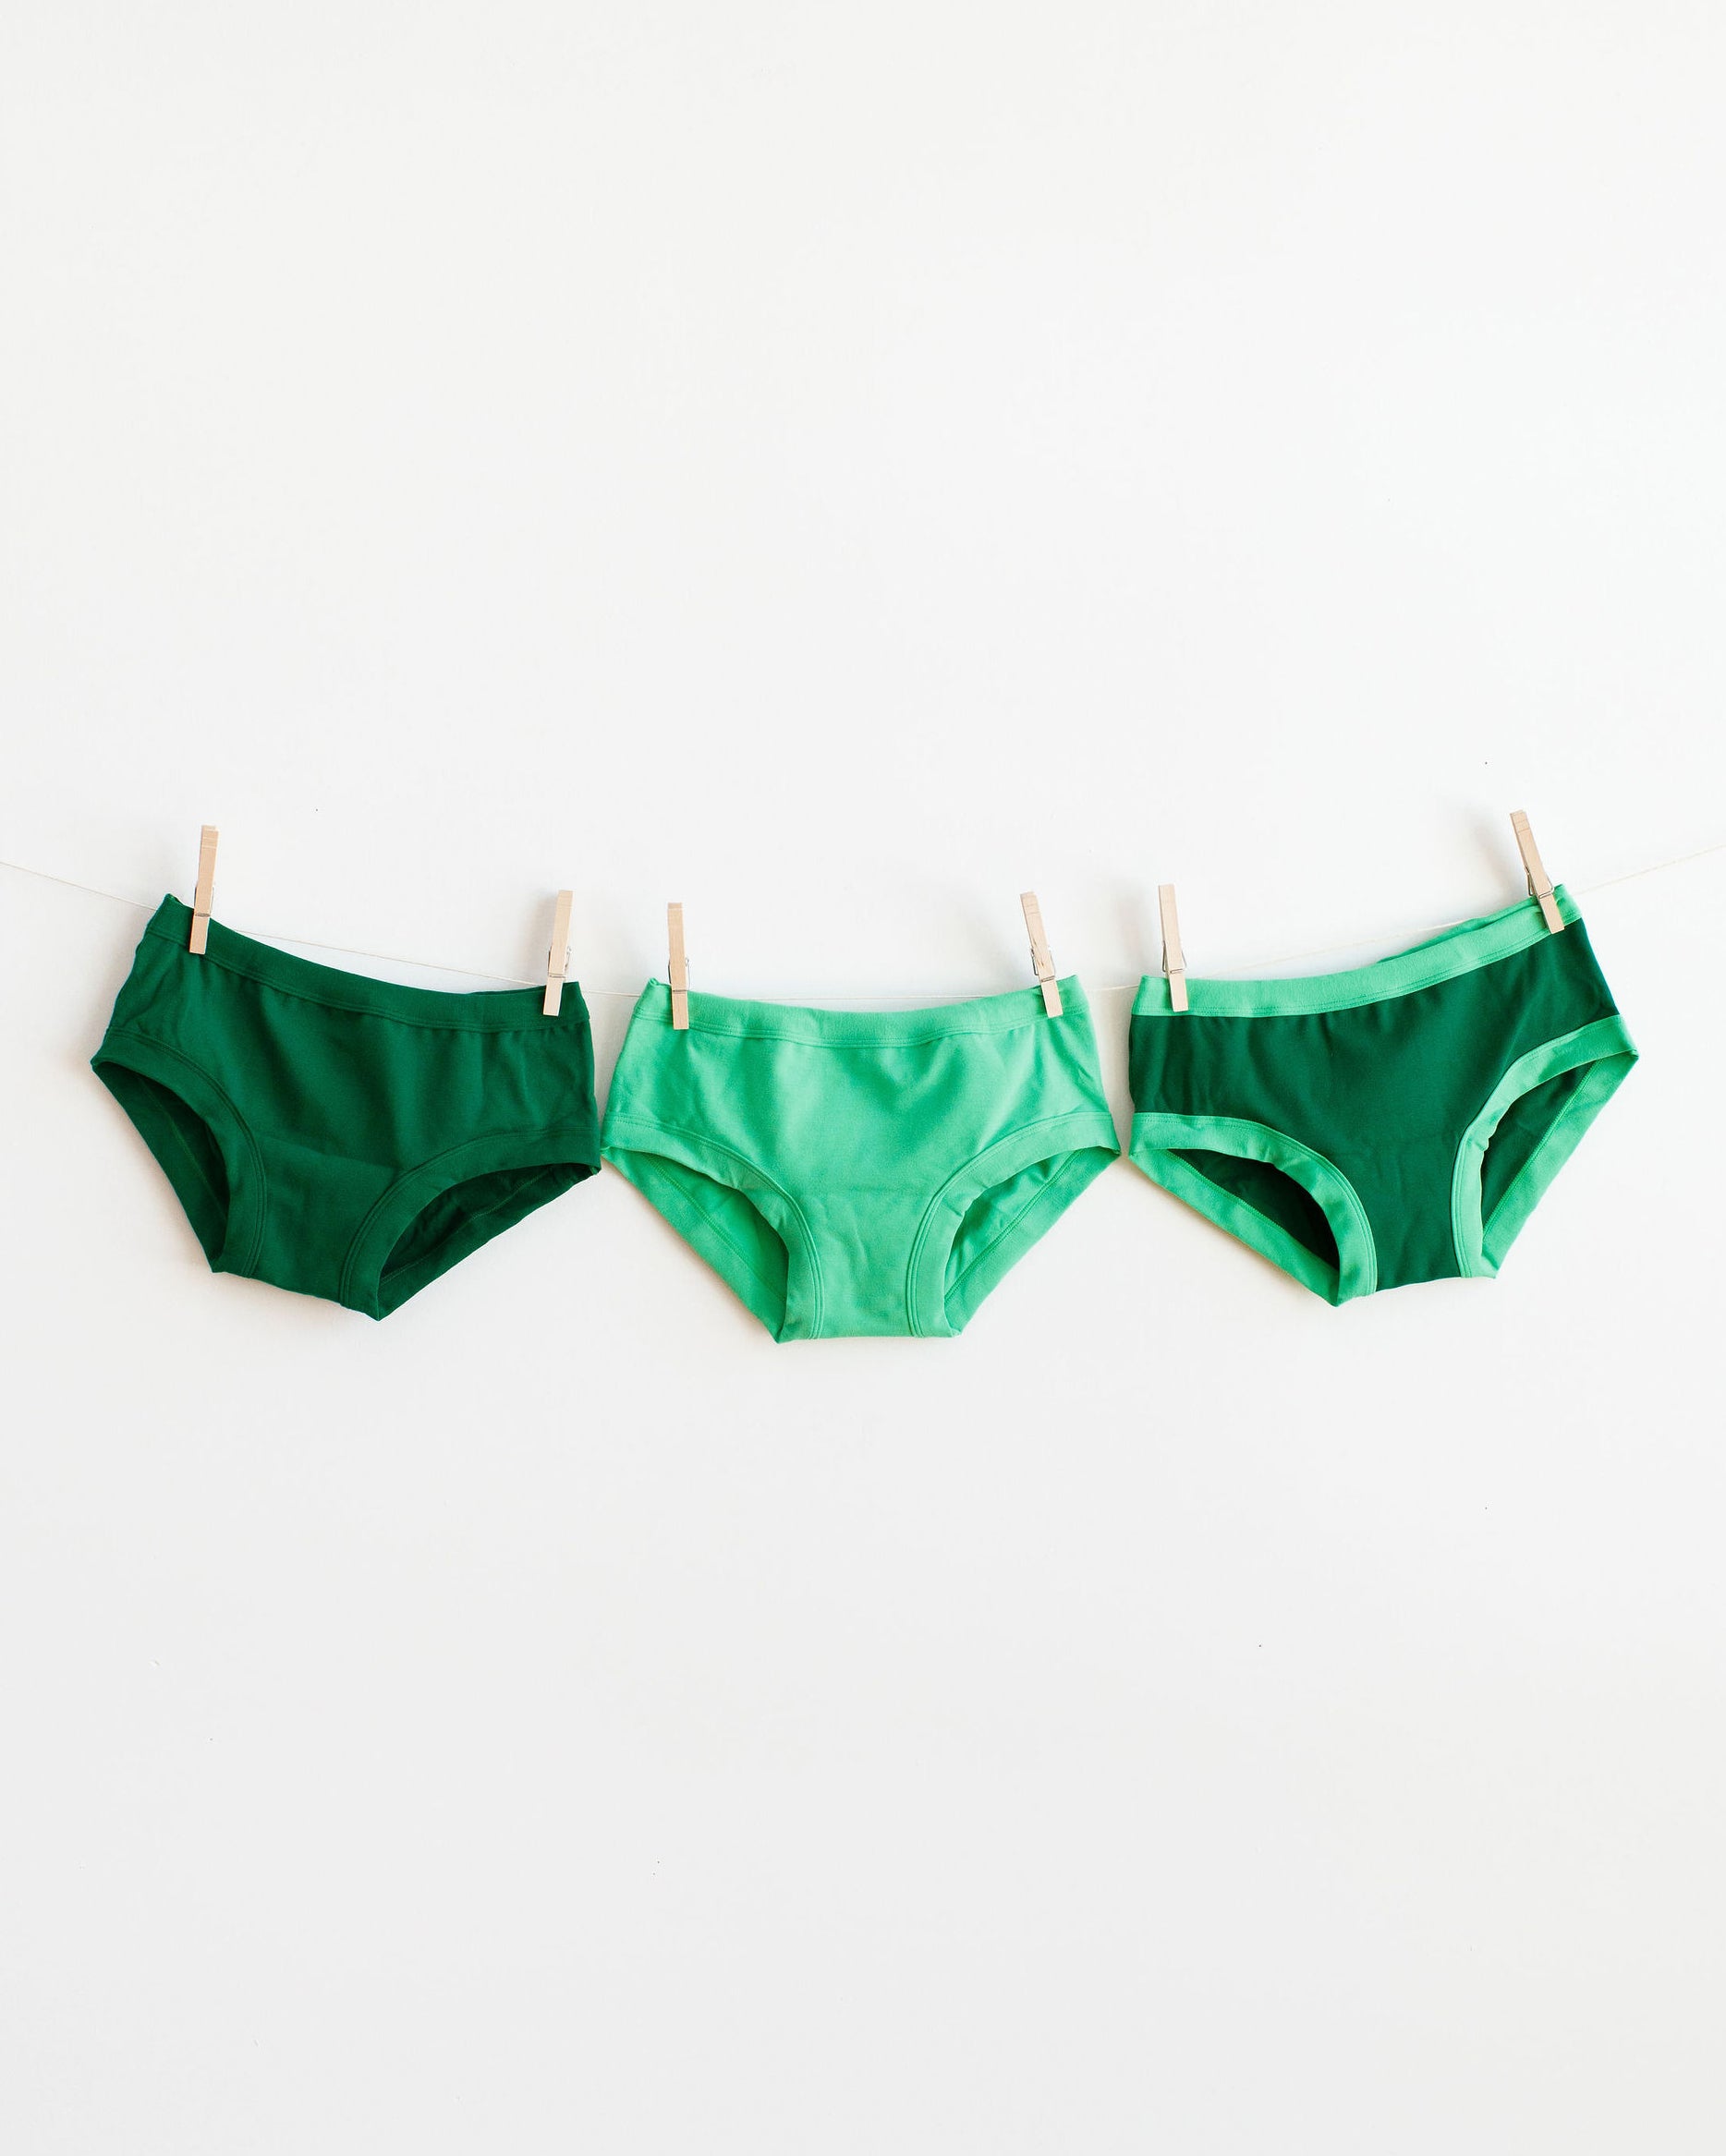 Three Hipster style underwear in different green colors hanging on a white wall.